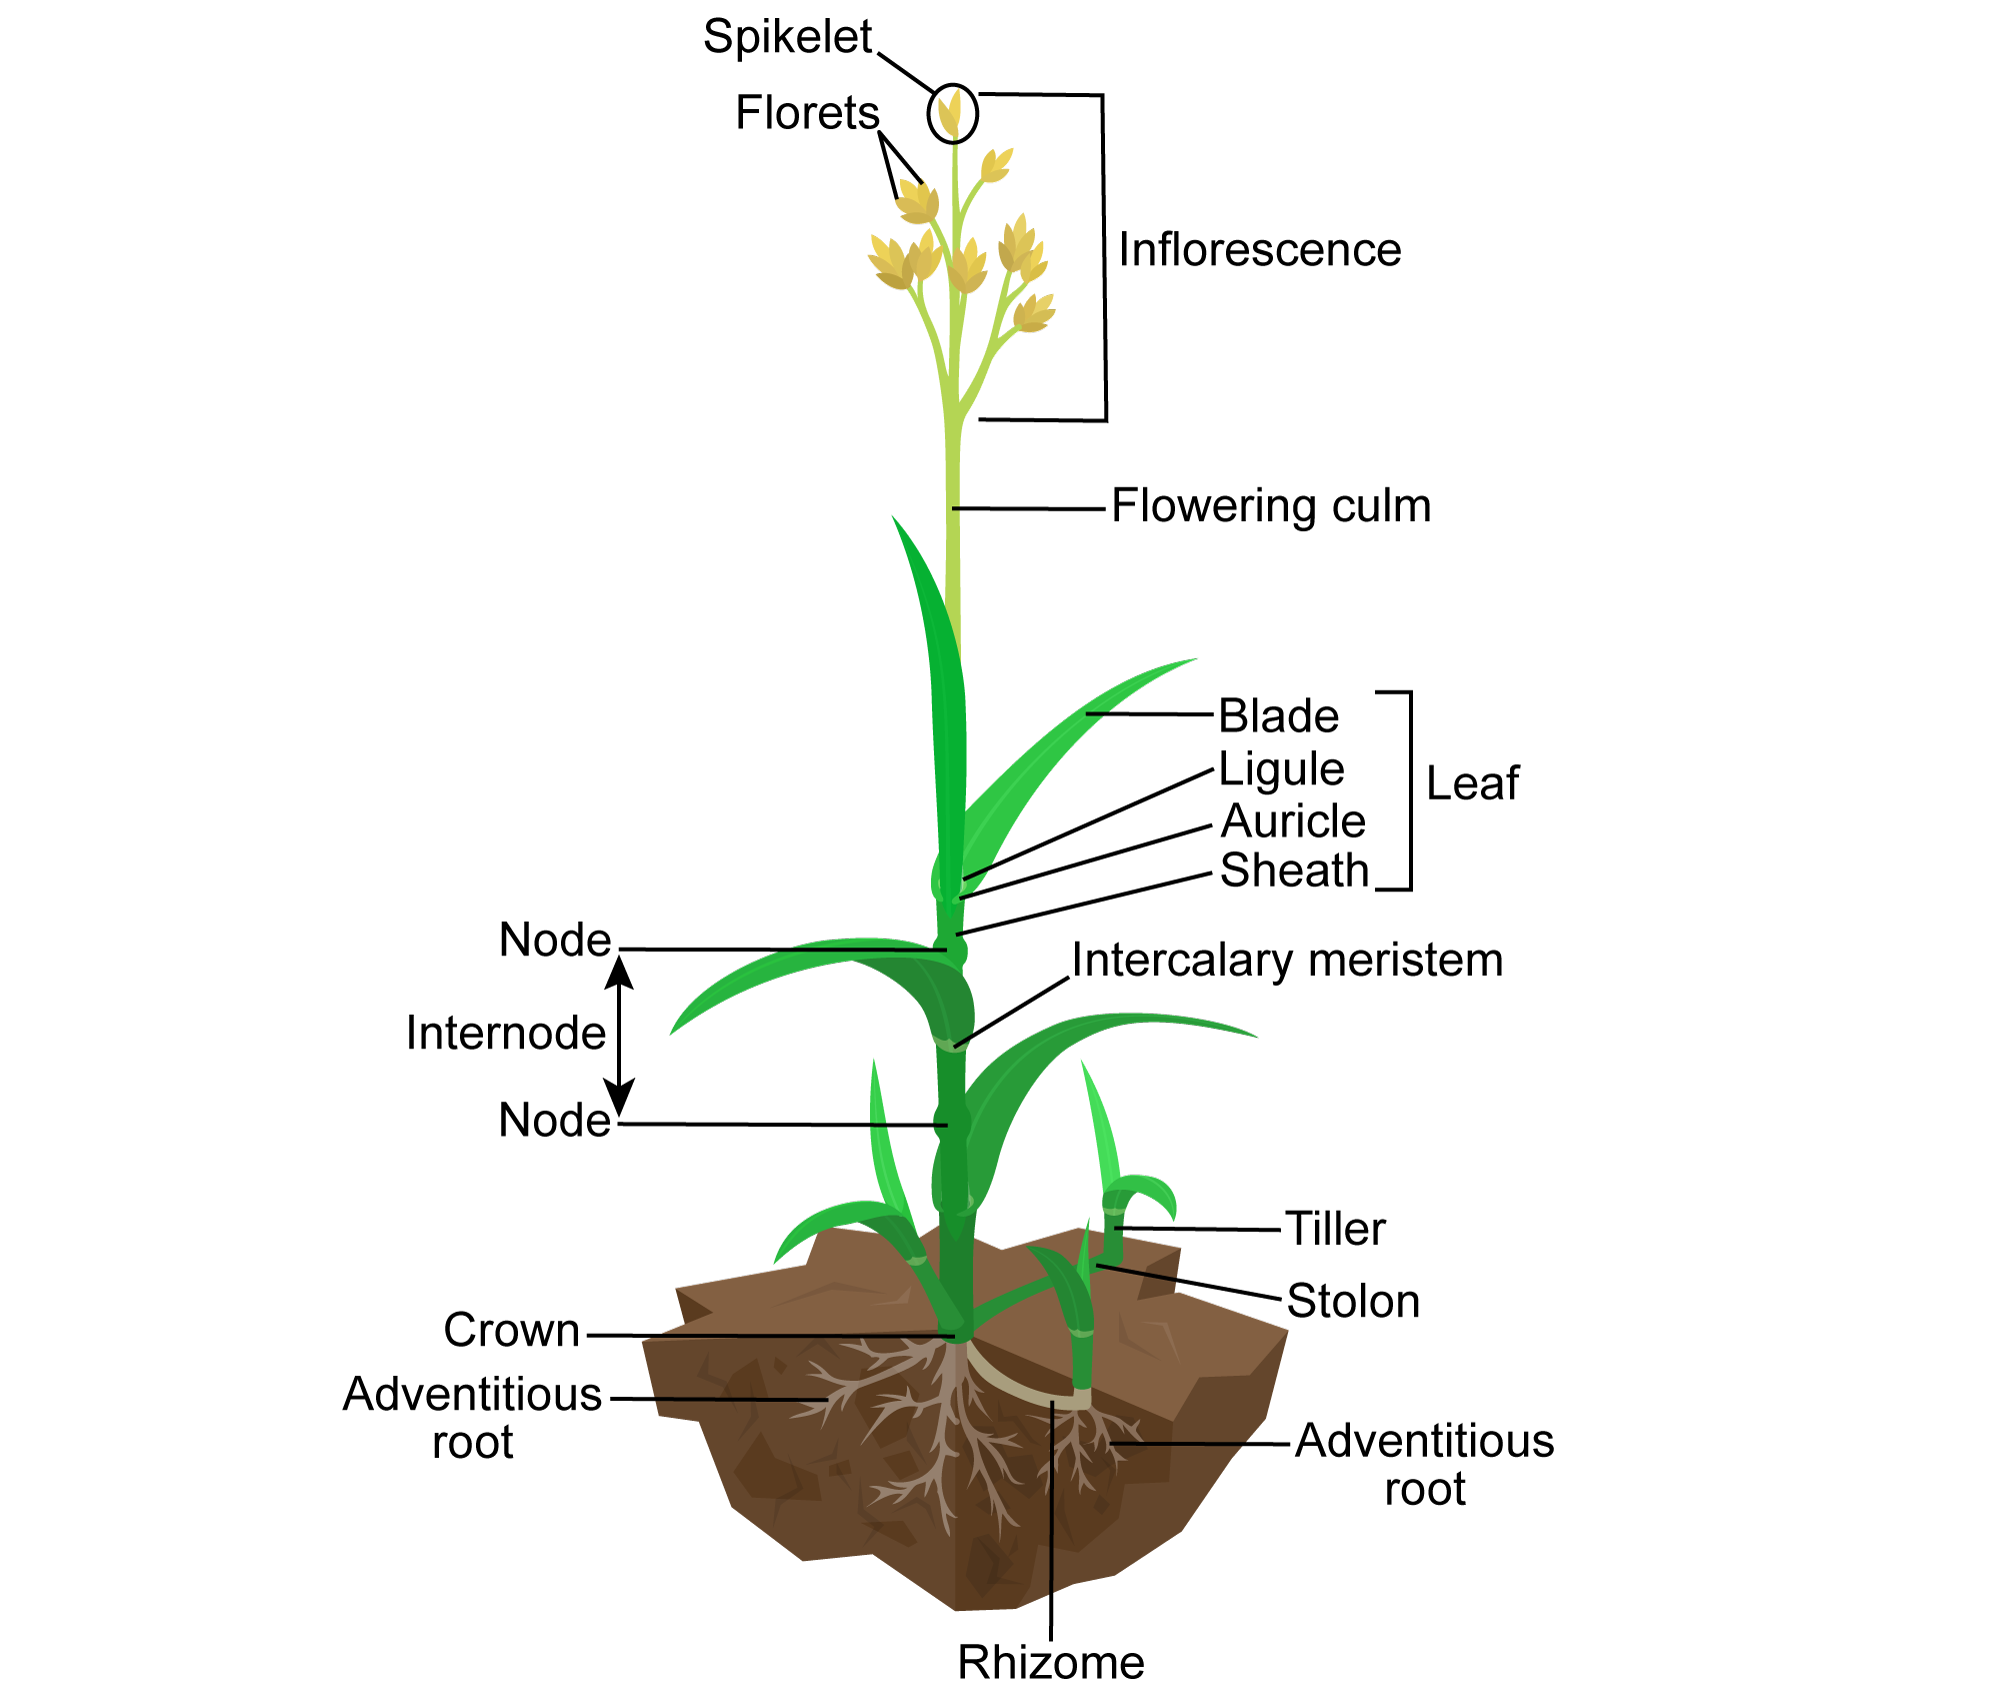 Diagram of a grass plant showing above and below-ground parts with labels. Labels include, from top to bottom: Spikelet, florets, inflorescence, flowering culm, leaf (with blade, ligule, auricle, and sheath), intercalary meristem between the leaf blade and sheath, node and internode on the culm, the crown at the base of the culm, rhizome, stolon, tiller, and adventitious roots.